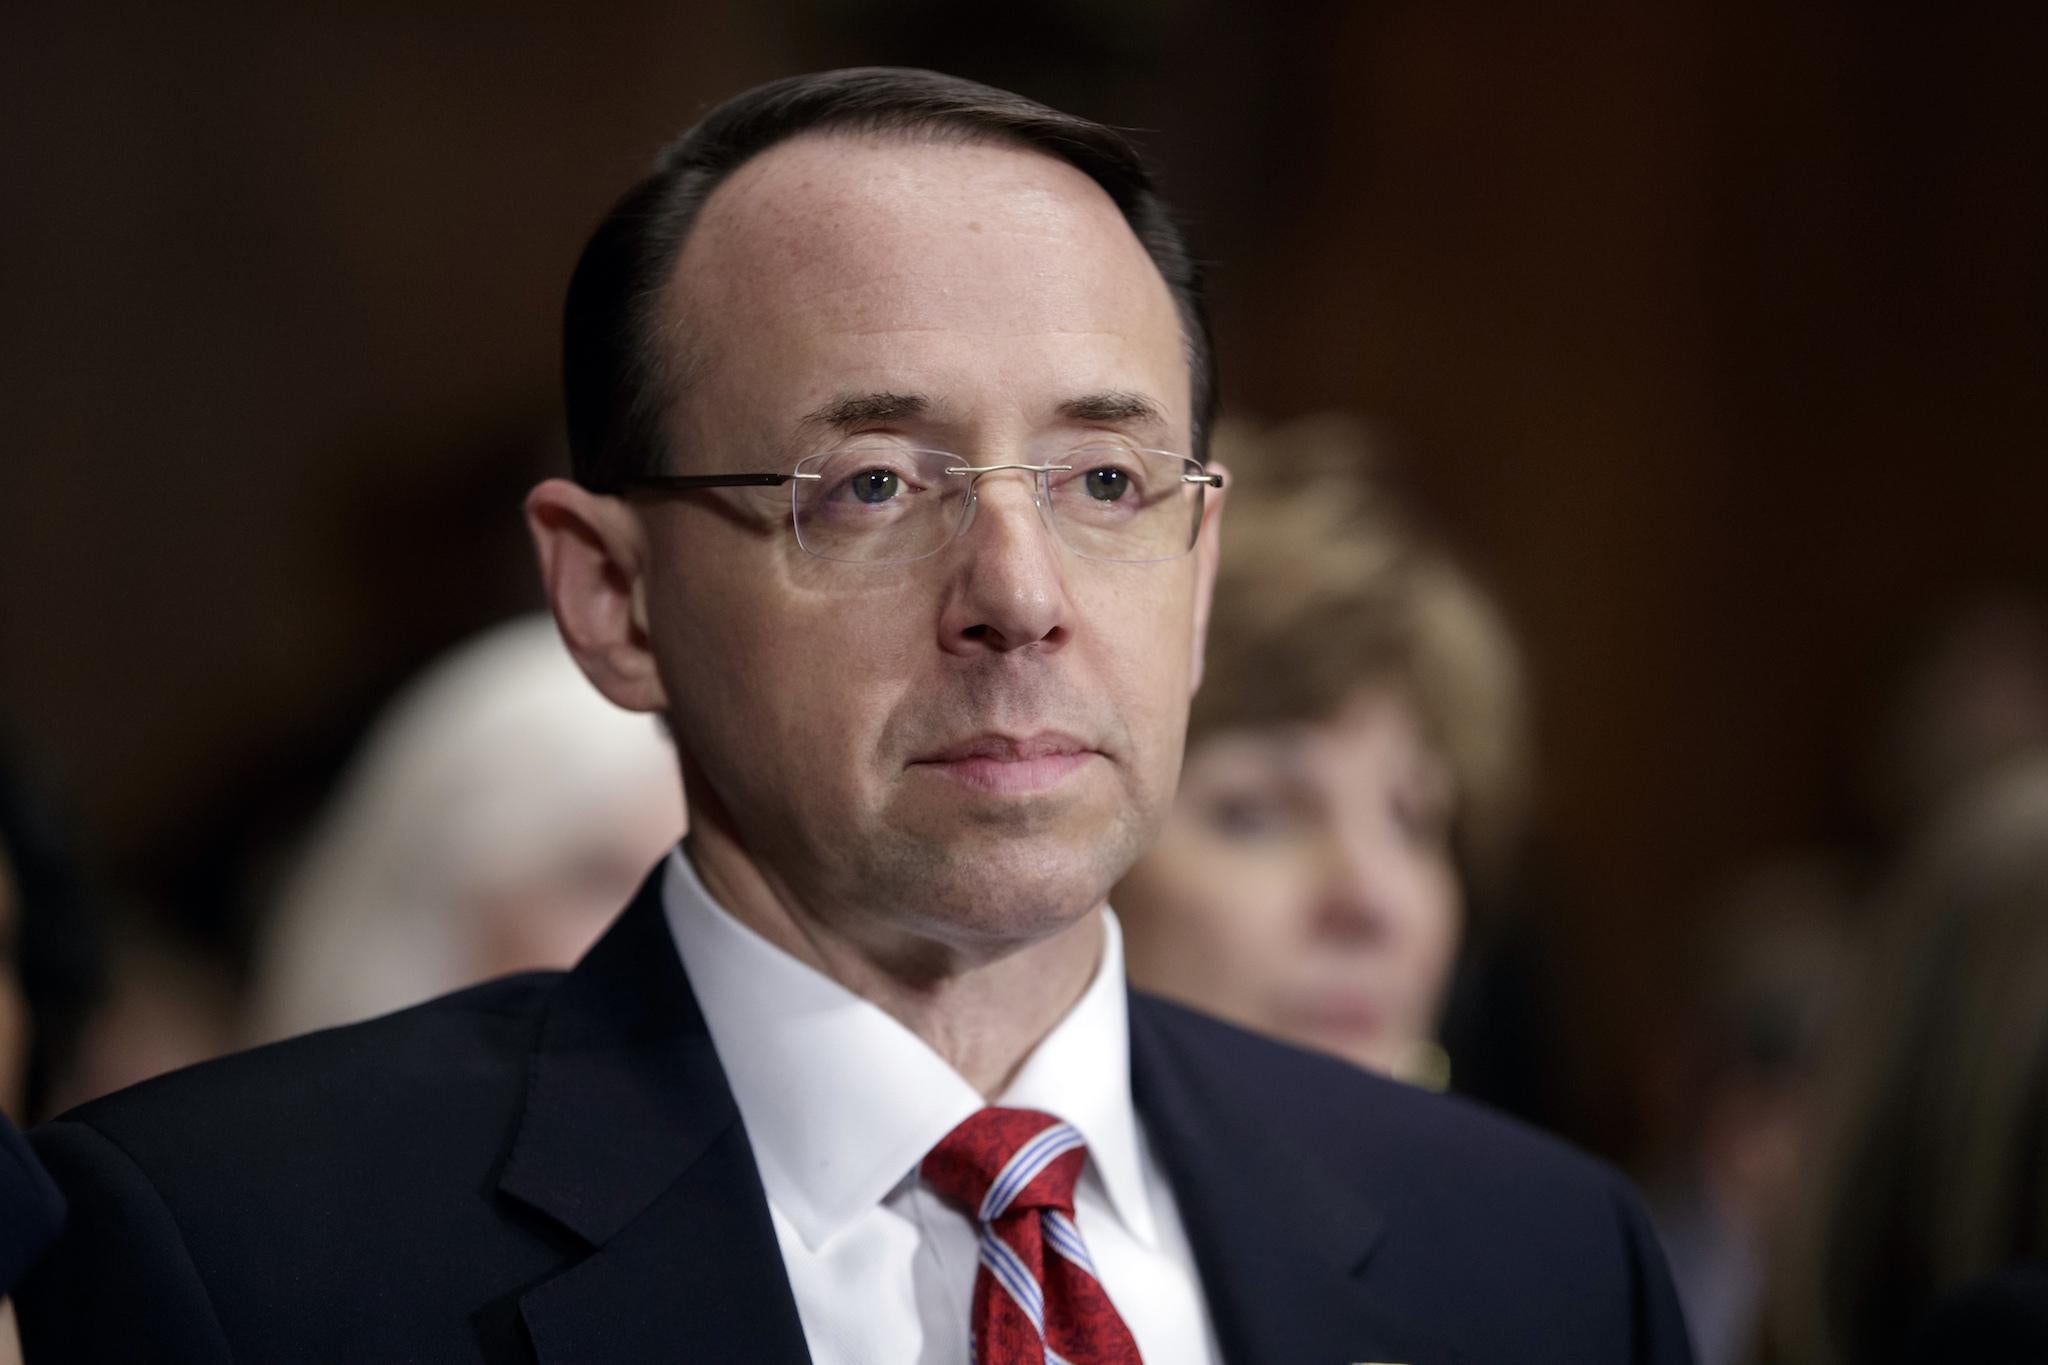 Rosenstein may recuse himself from the Russia probe, an indicator that the investigation is growing